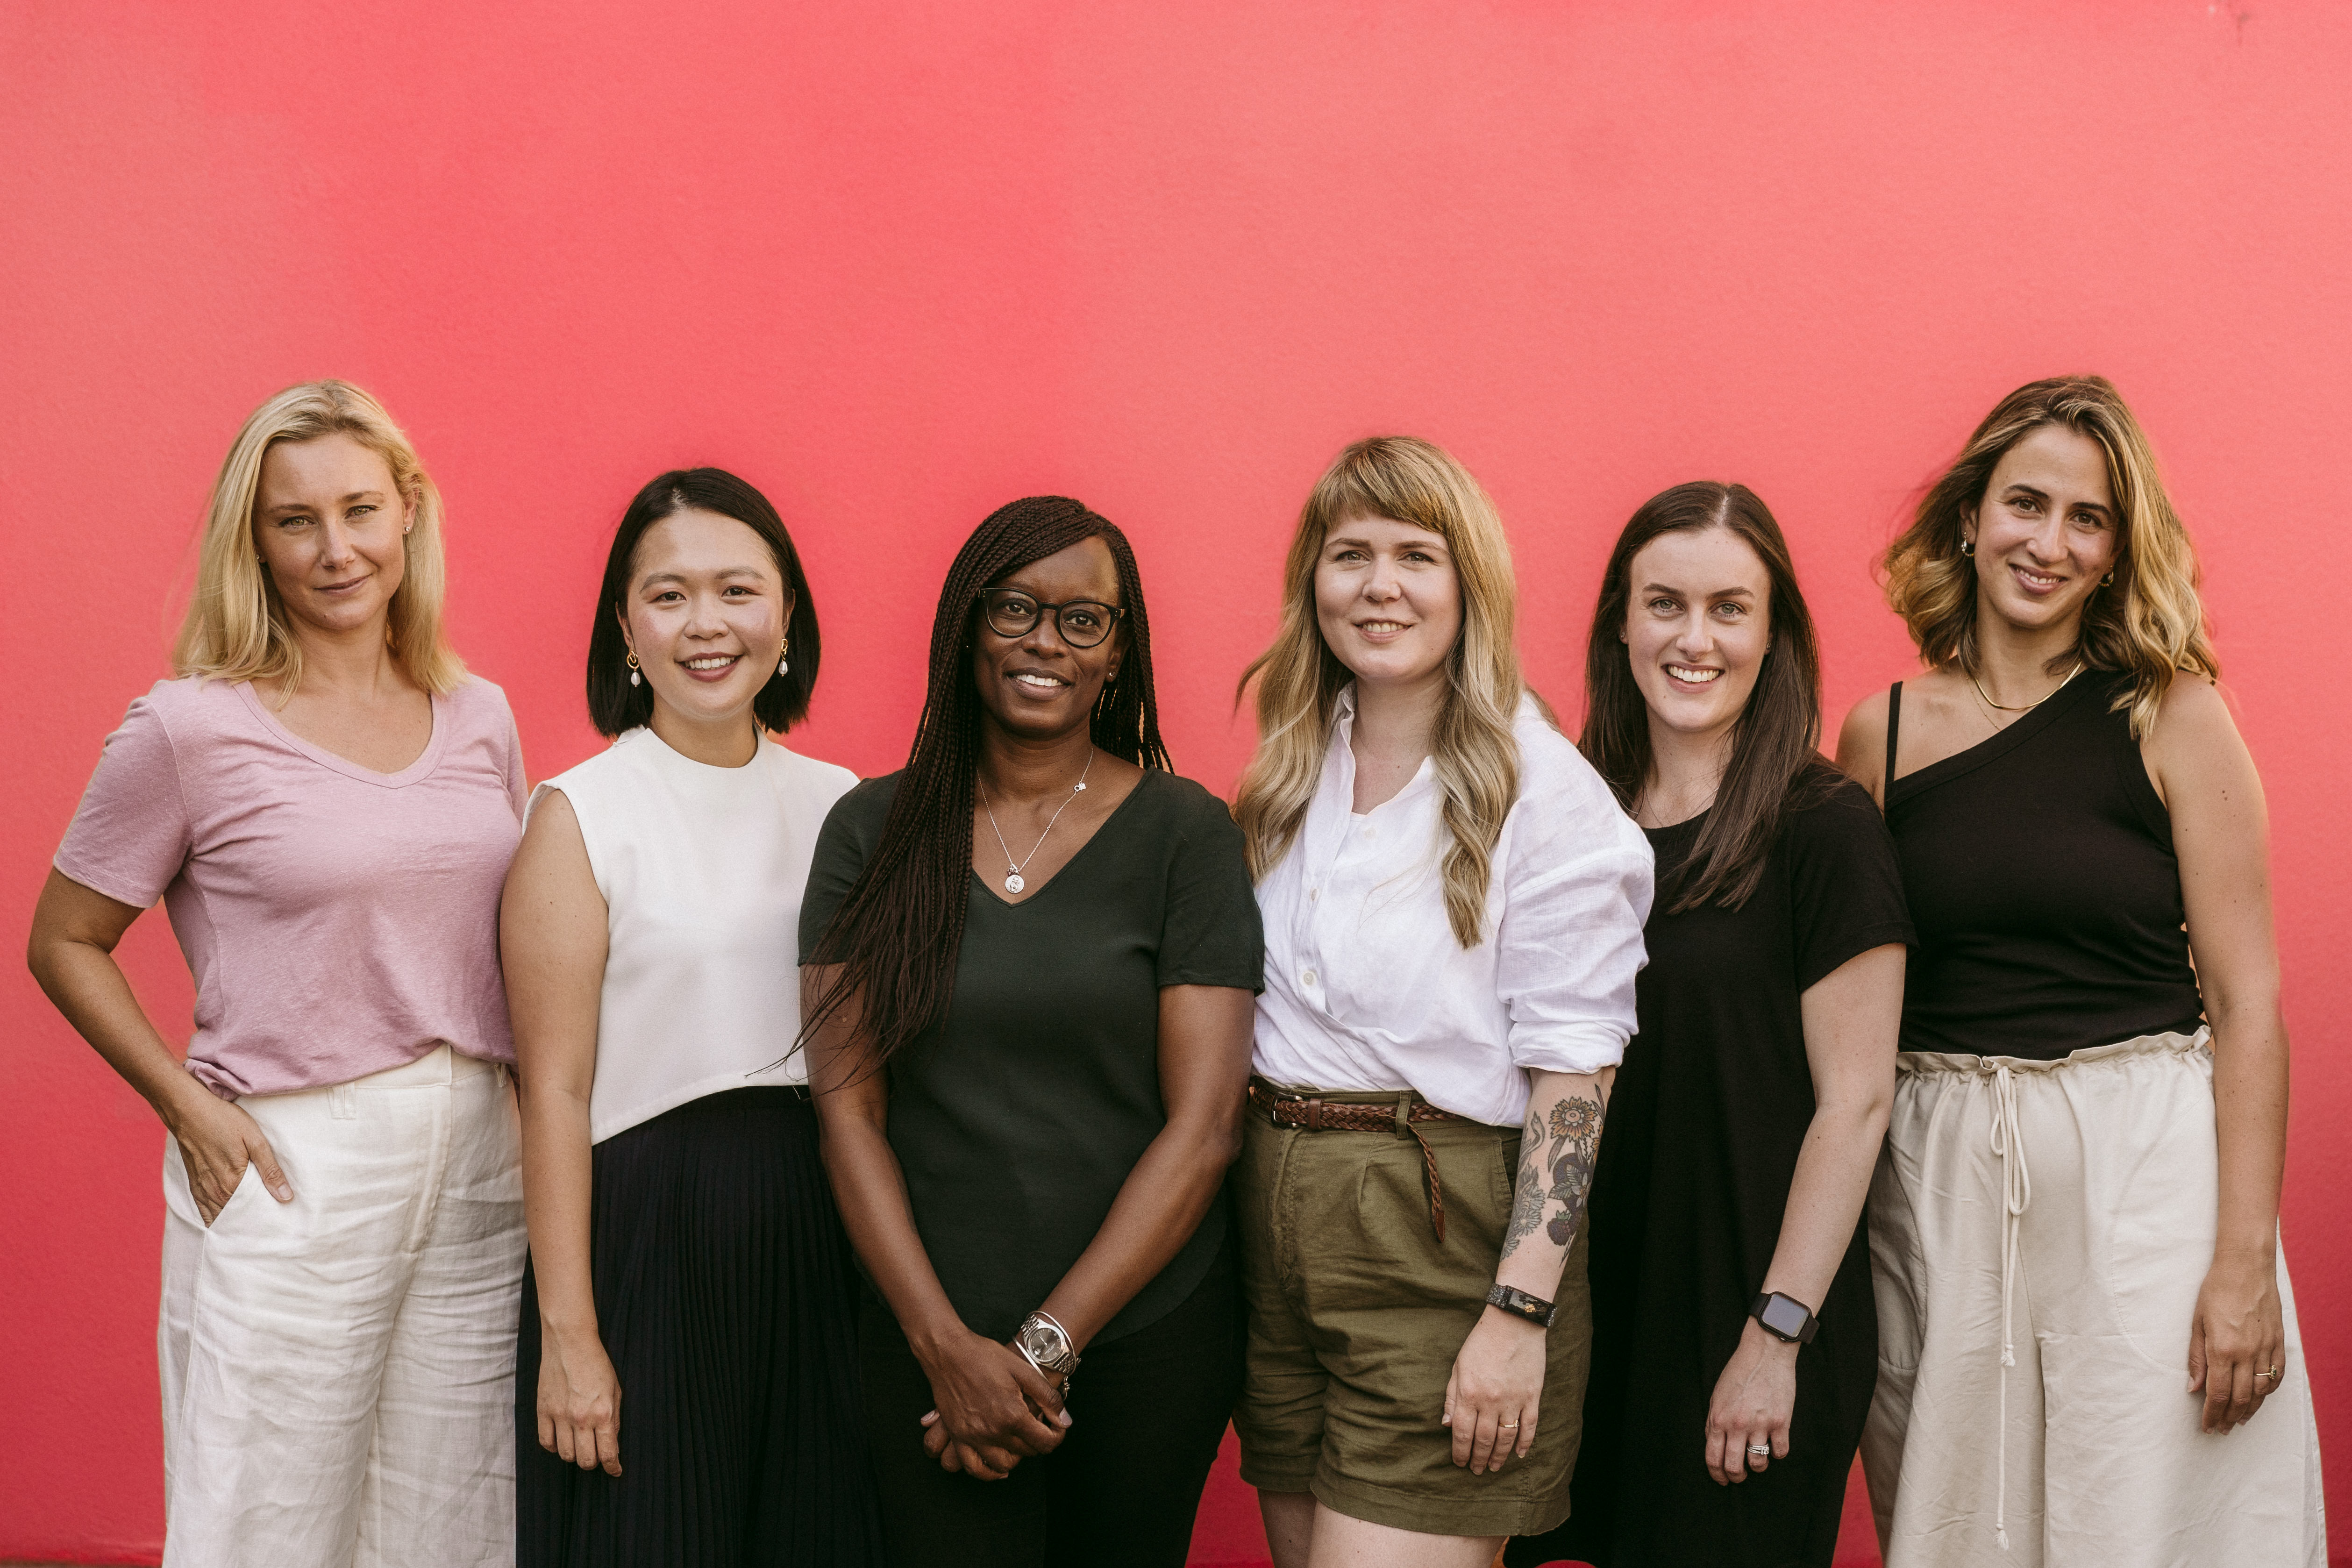 A photograph of a group of 6 women standing against a backdrop of a red wall, looking directly at the camera while smiling.